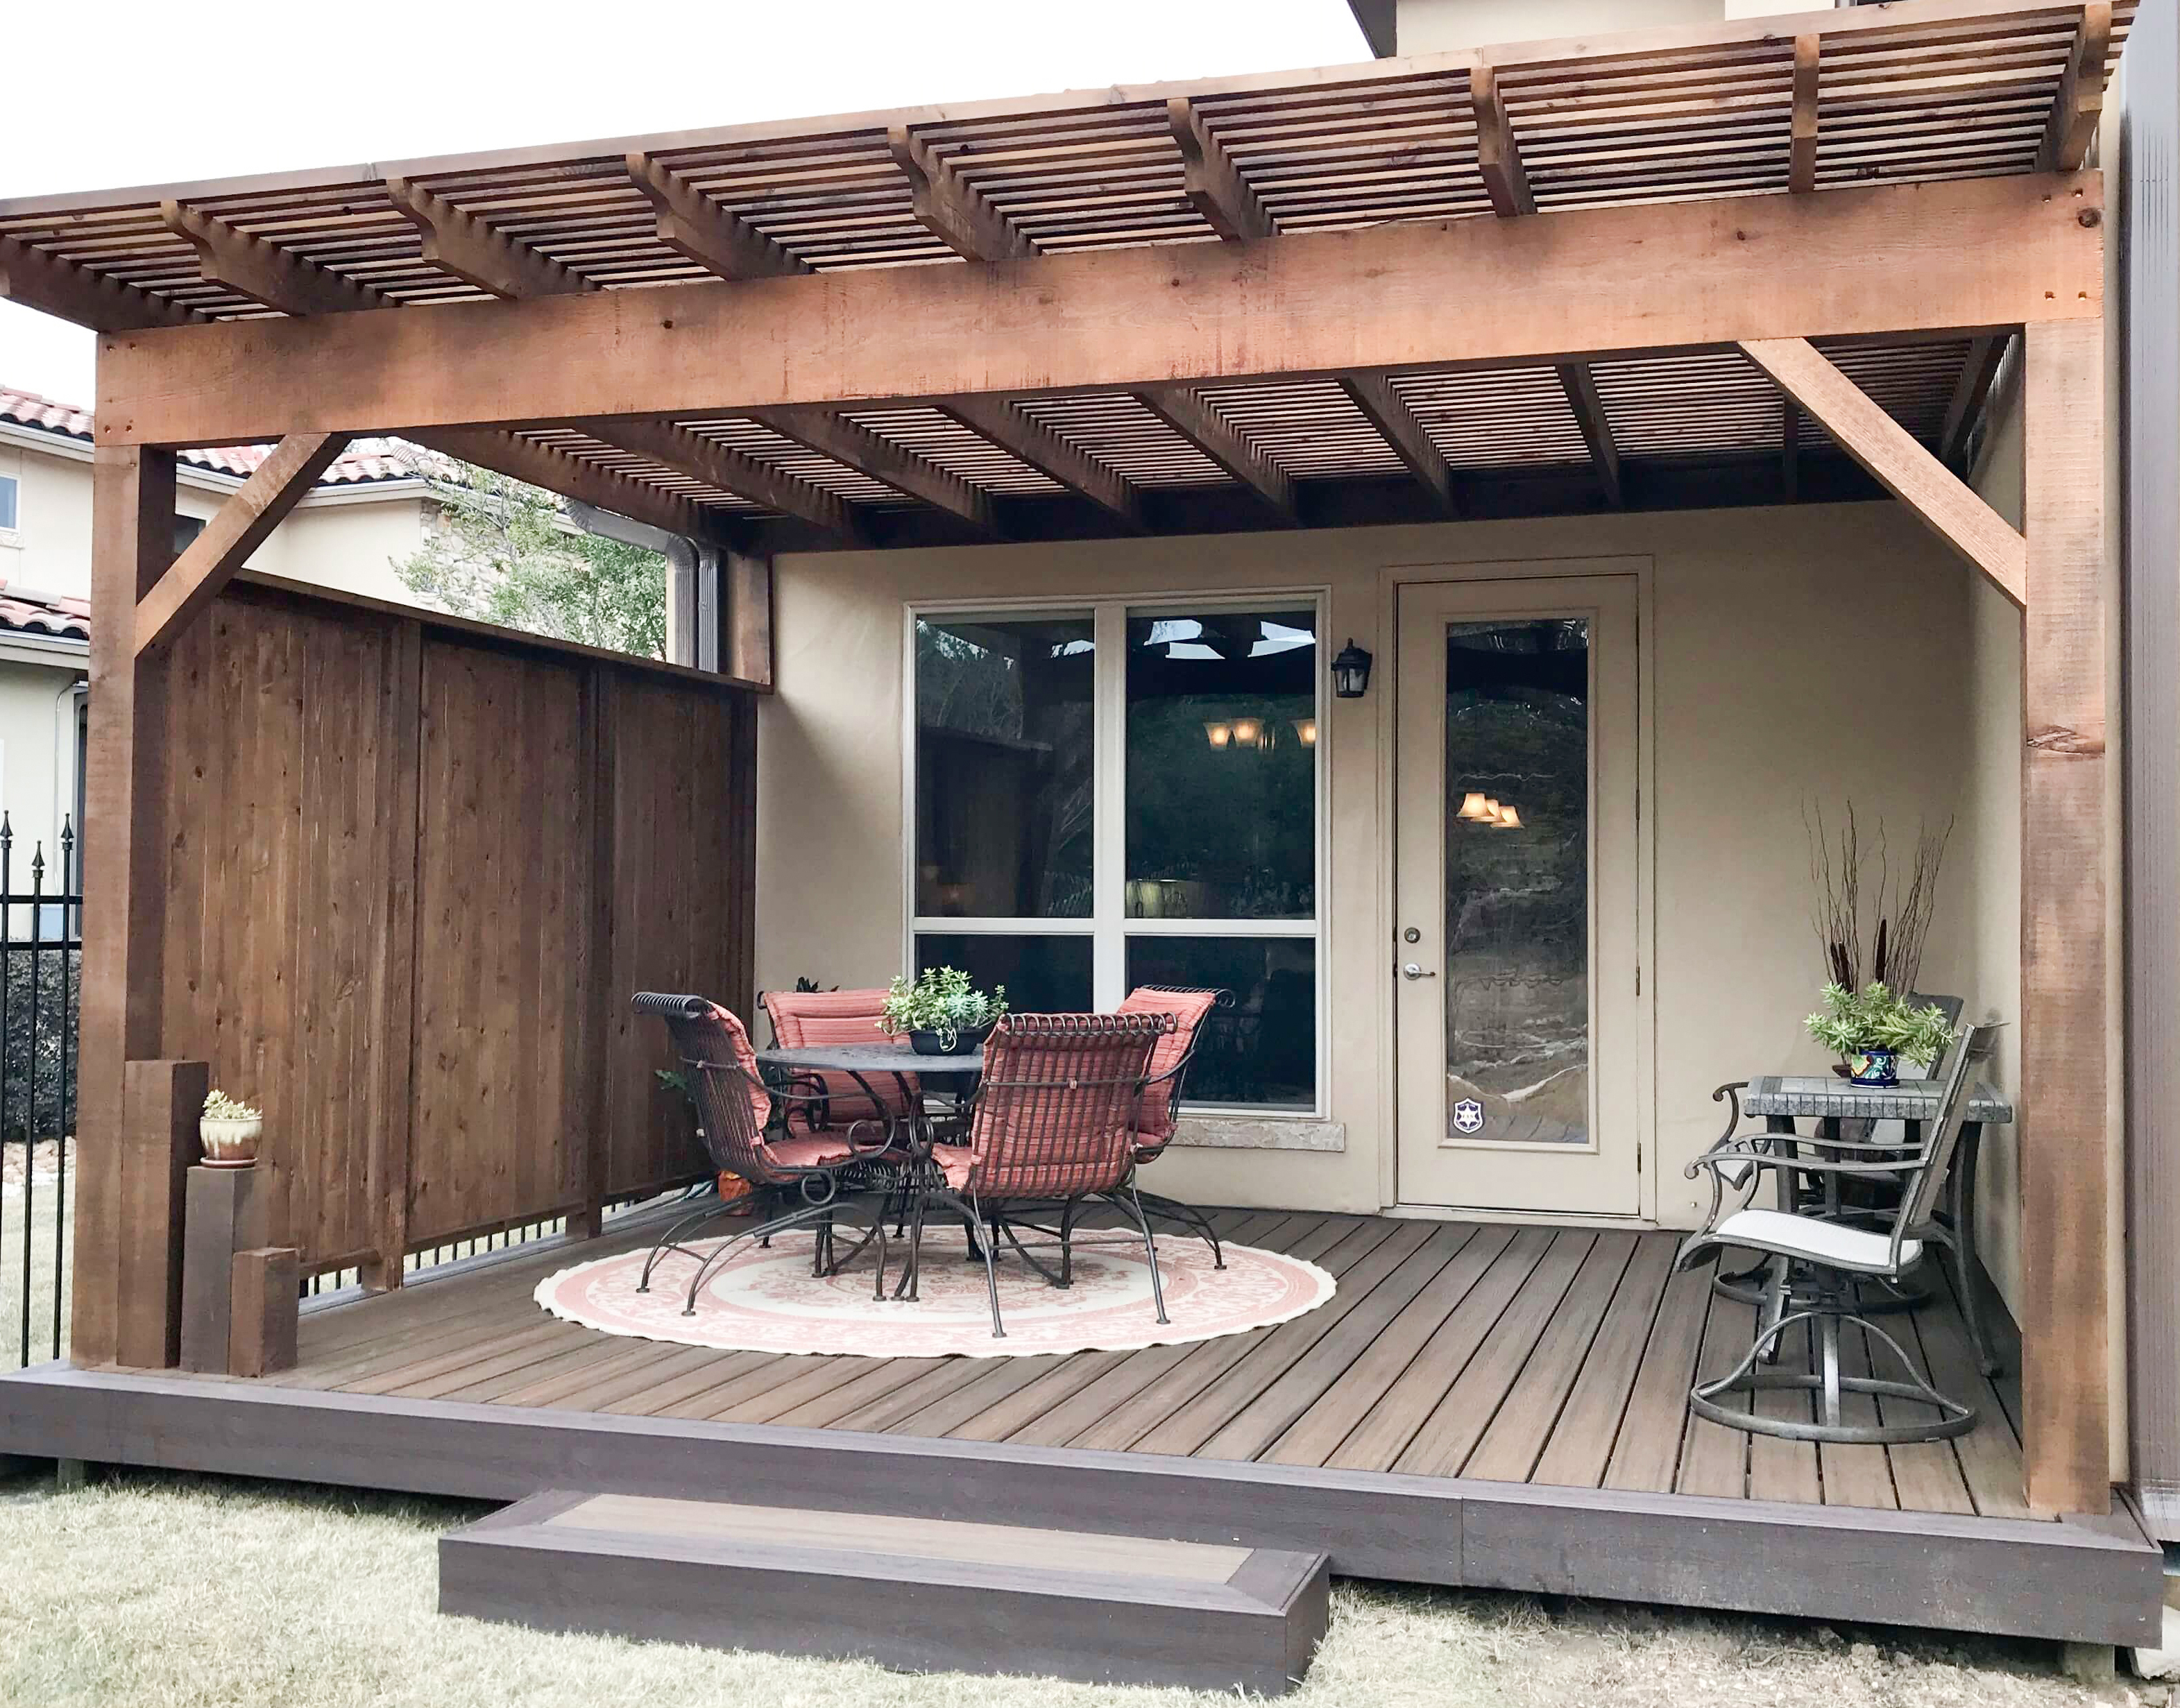 West Hollywood Garage Conversions - Granny Flats - Contractor